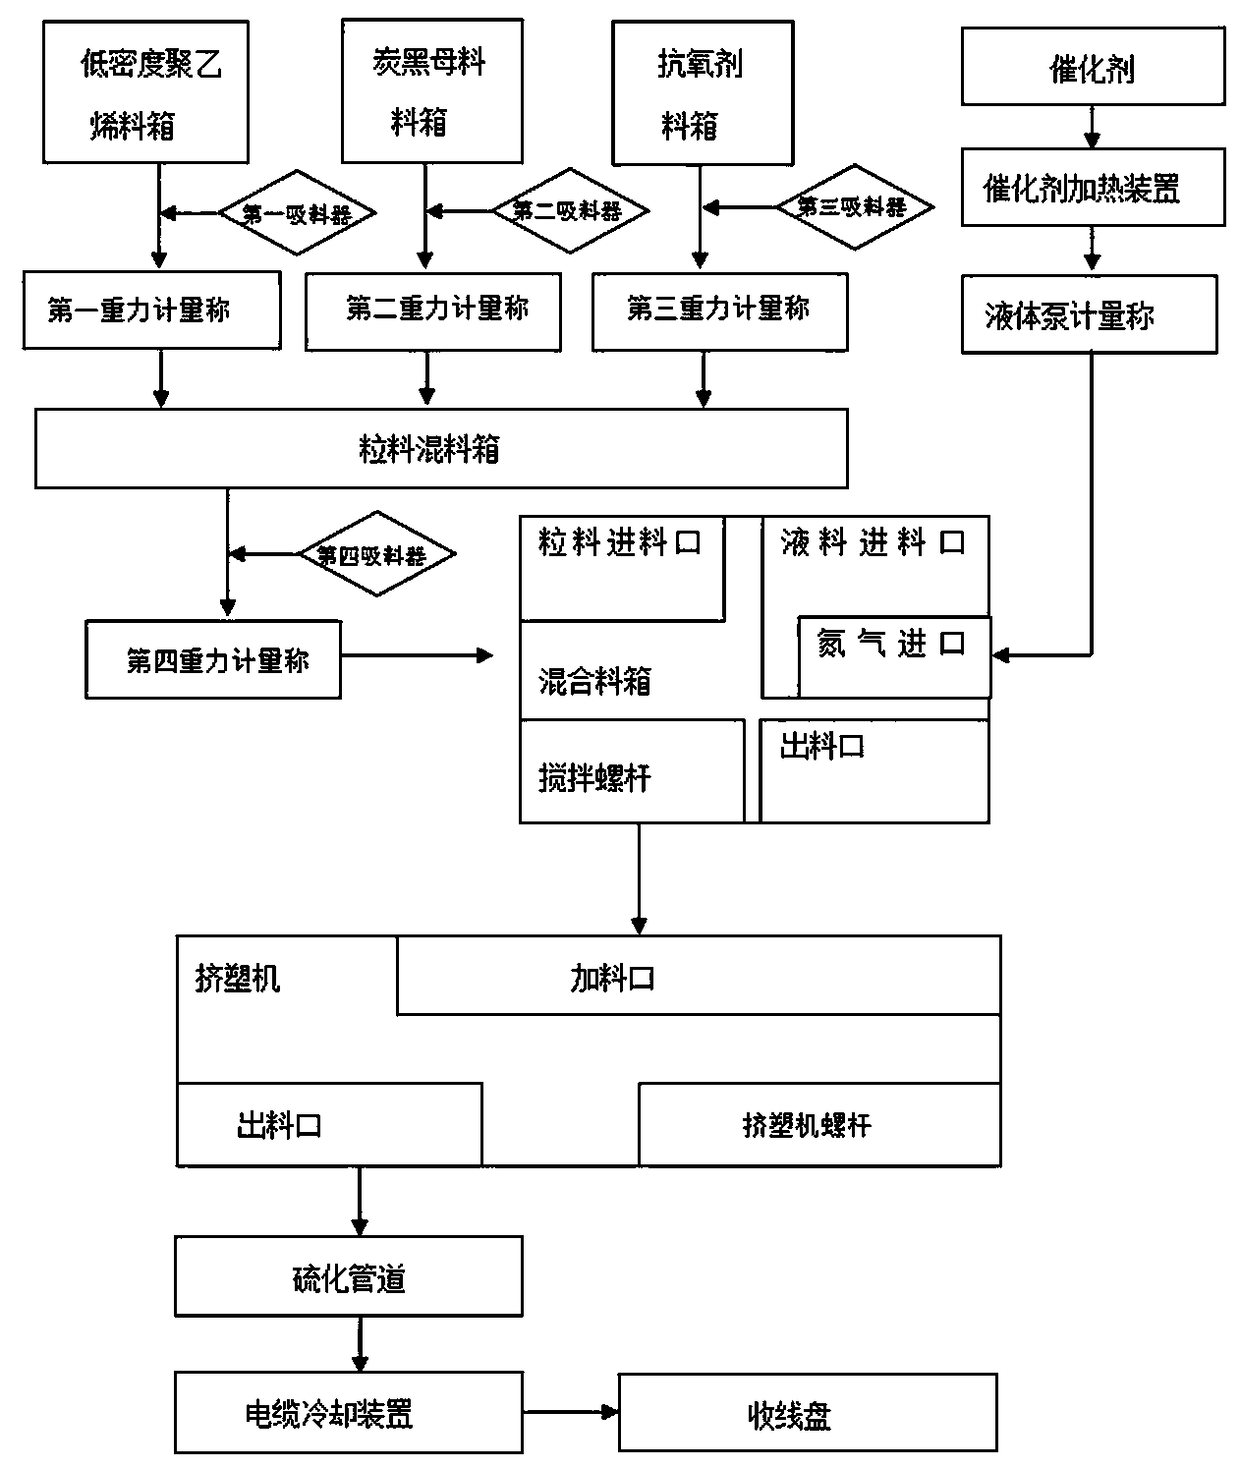 Corrosion-resistant wind-vibration-resistant medium-strength aluminum alloy conductor aerial insulation cable production device and working method thereof